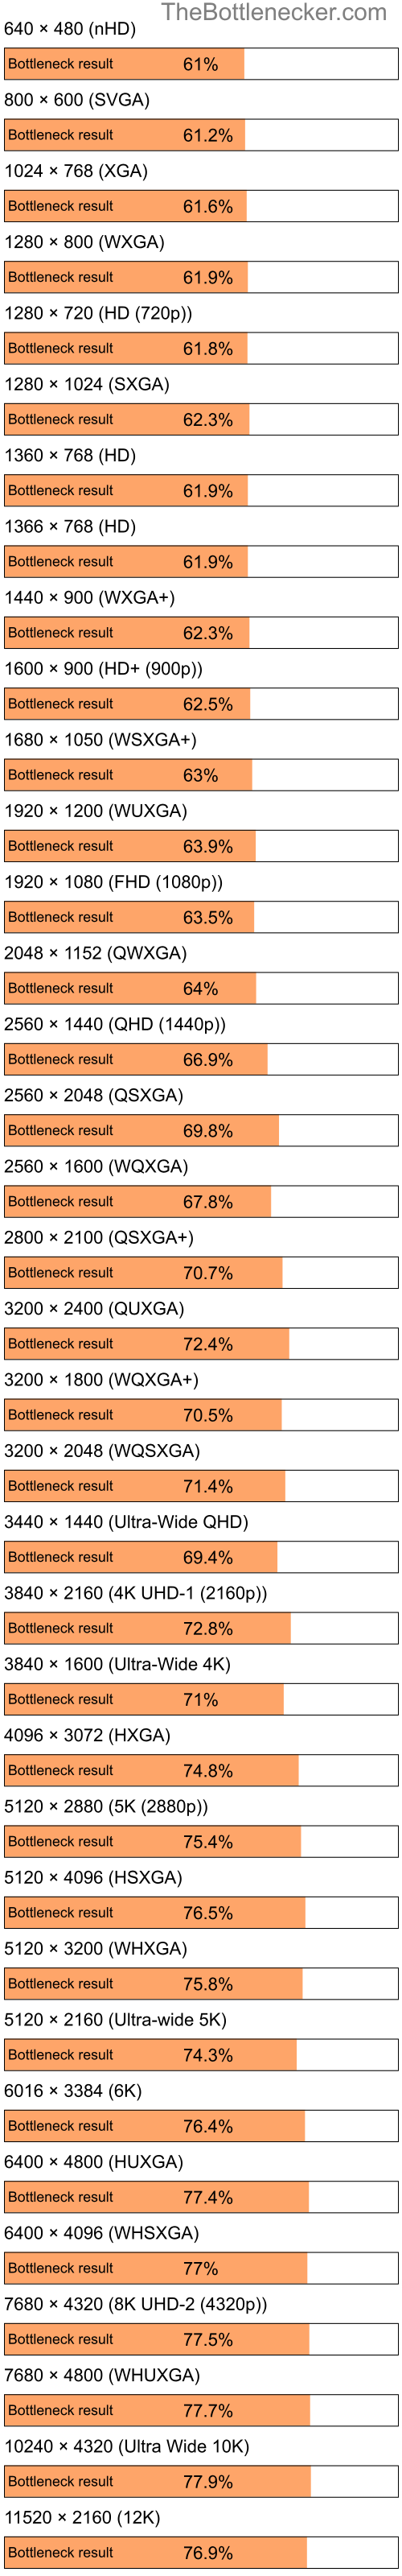 Bottleneck results by resolution for Intel Celeron and AMD Mobility Radeon HD 3470 in General Tasks